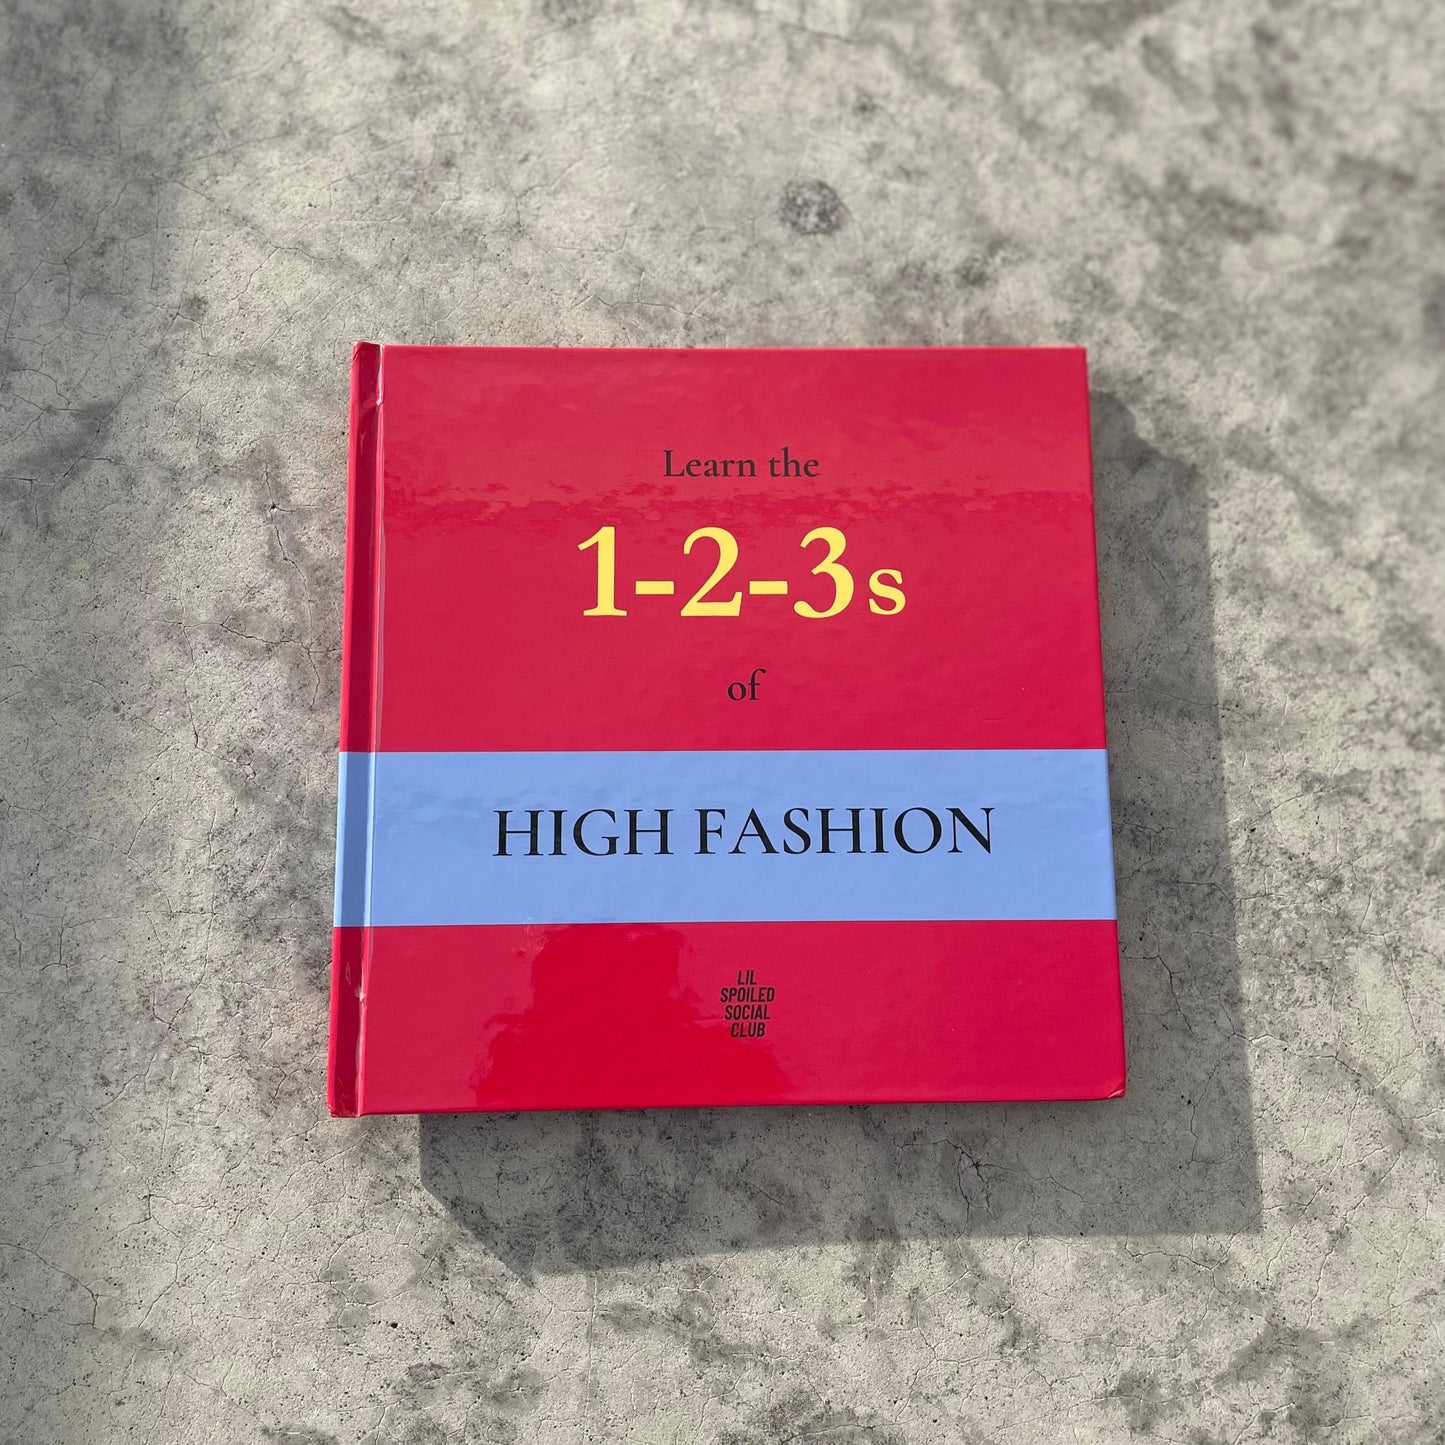 Learn the 1-2-3s of High Fashion